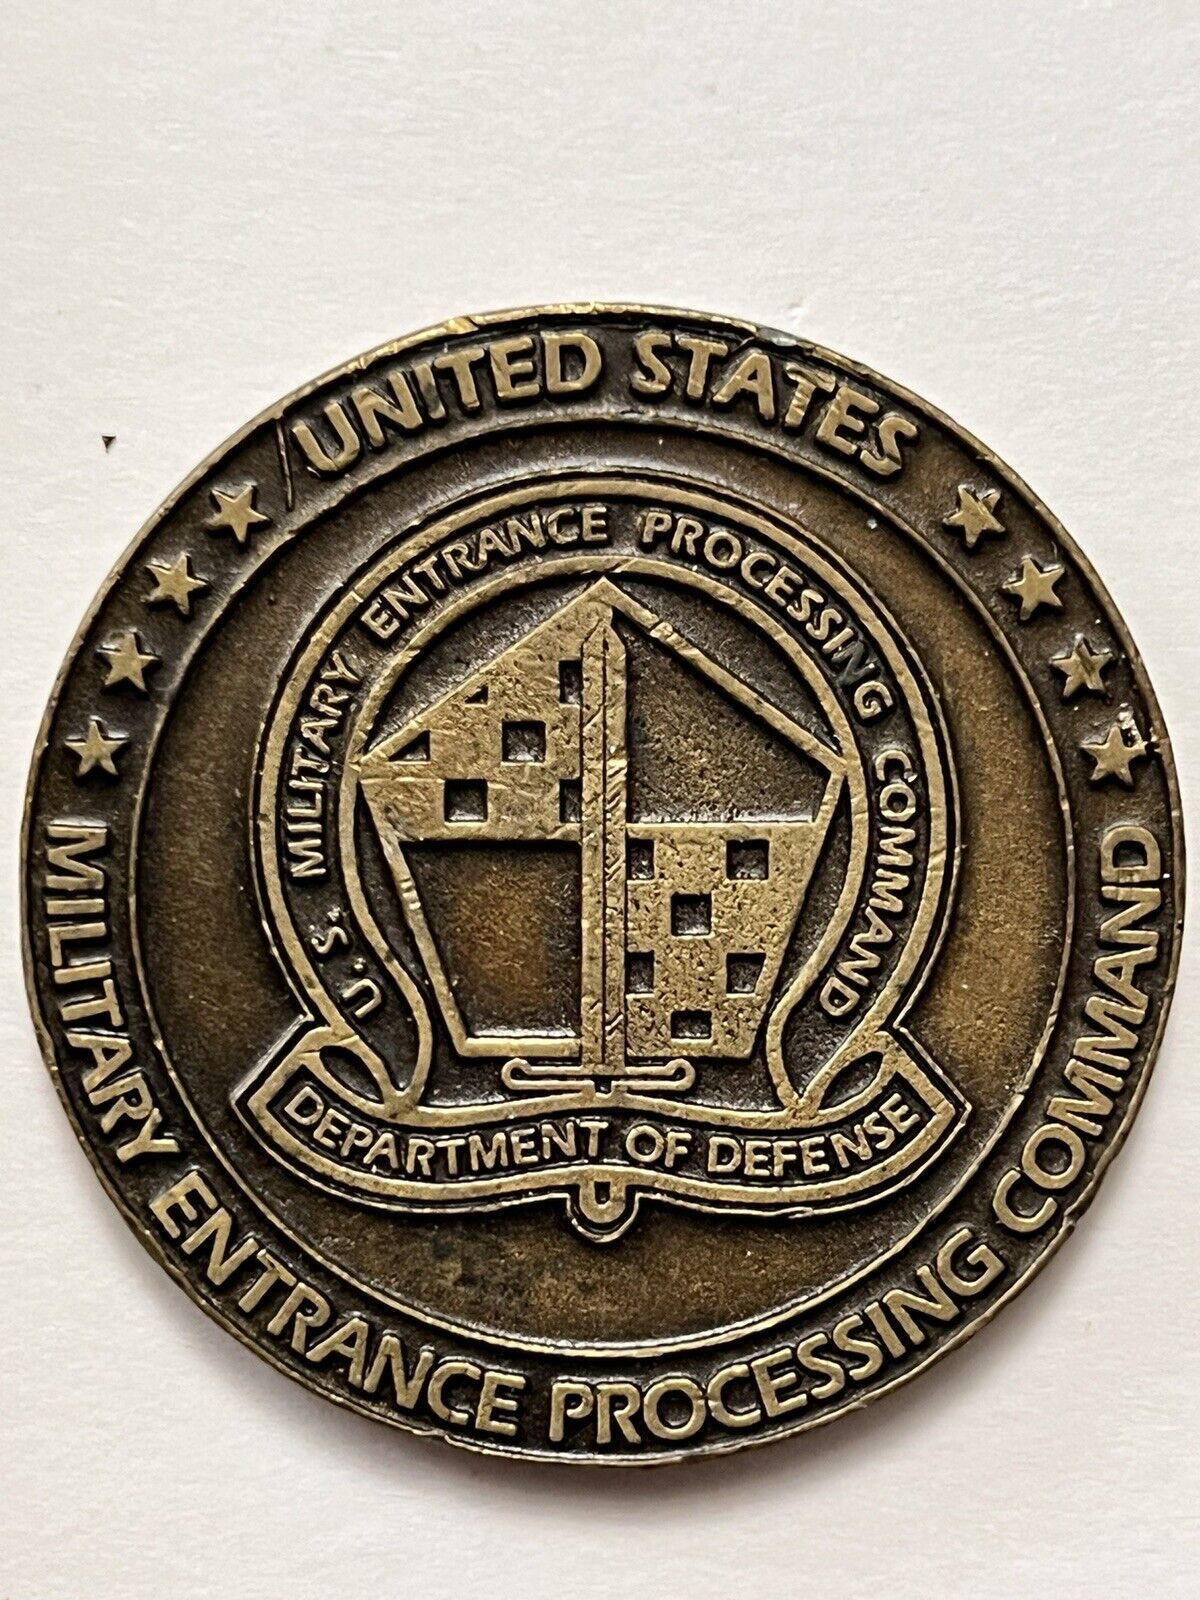 SUPER OLD U.S. Military Entrance Processing Command Department of Defense Coin